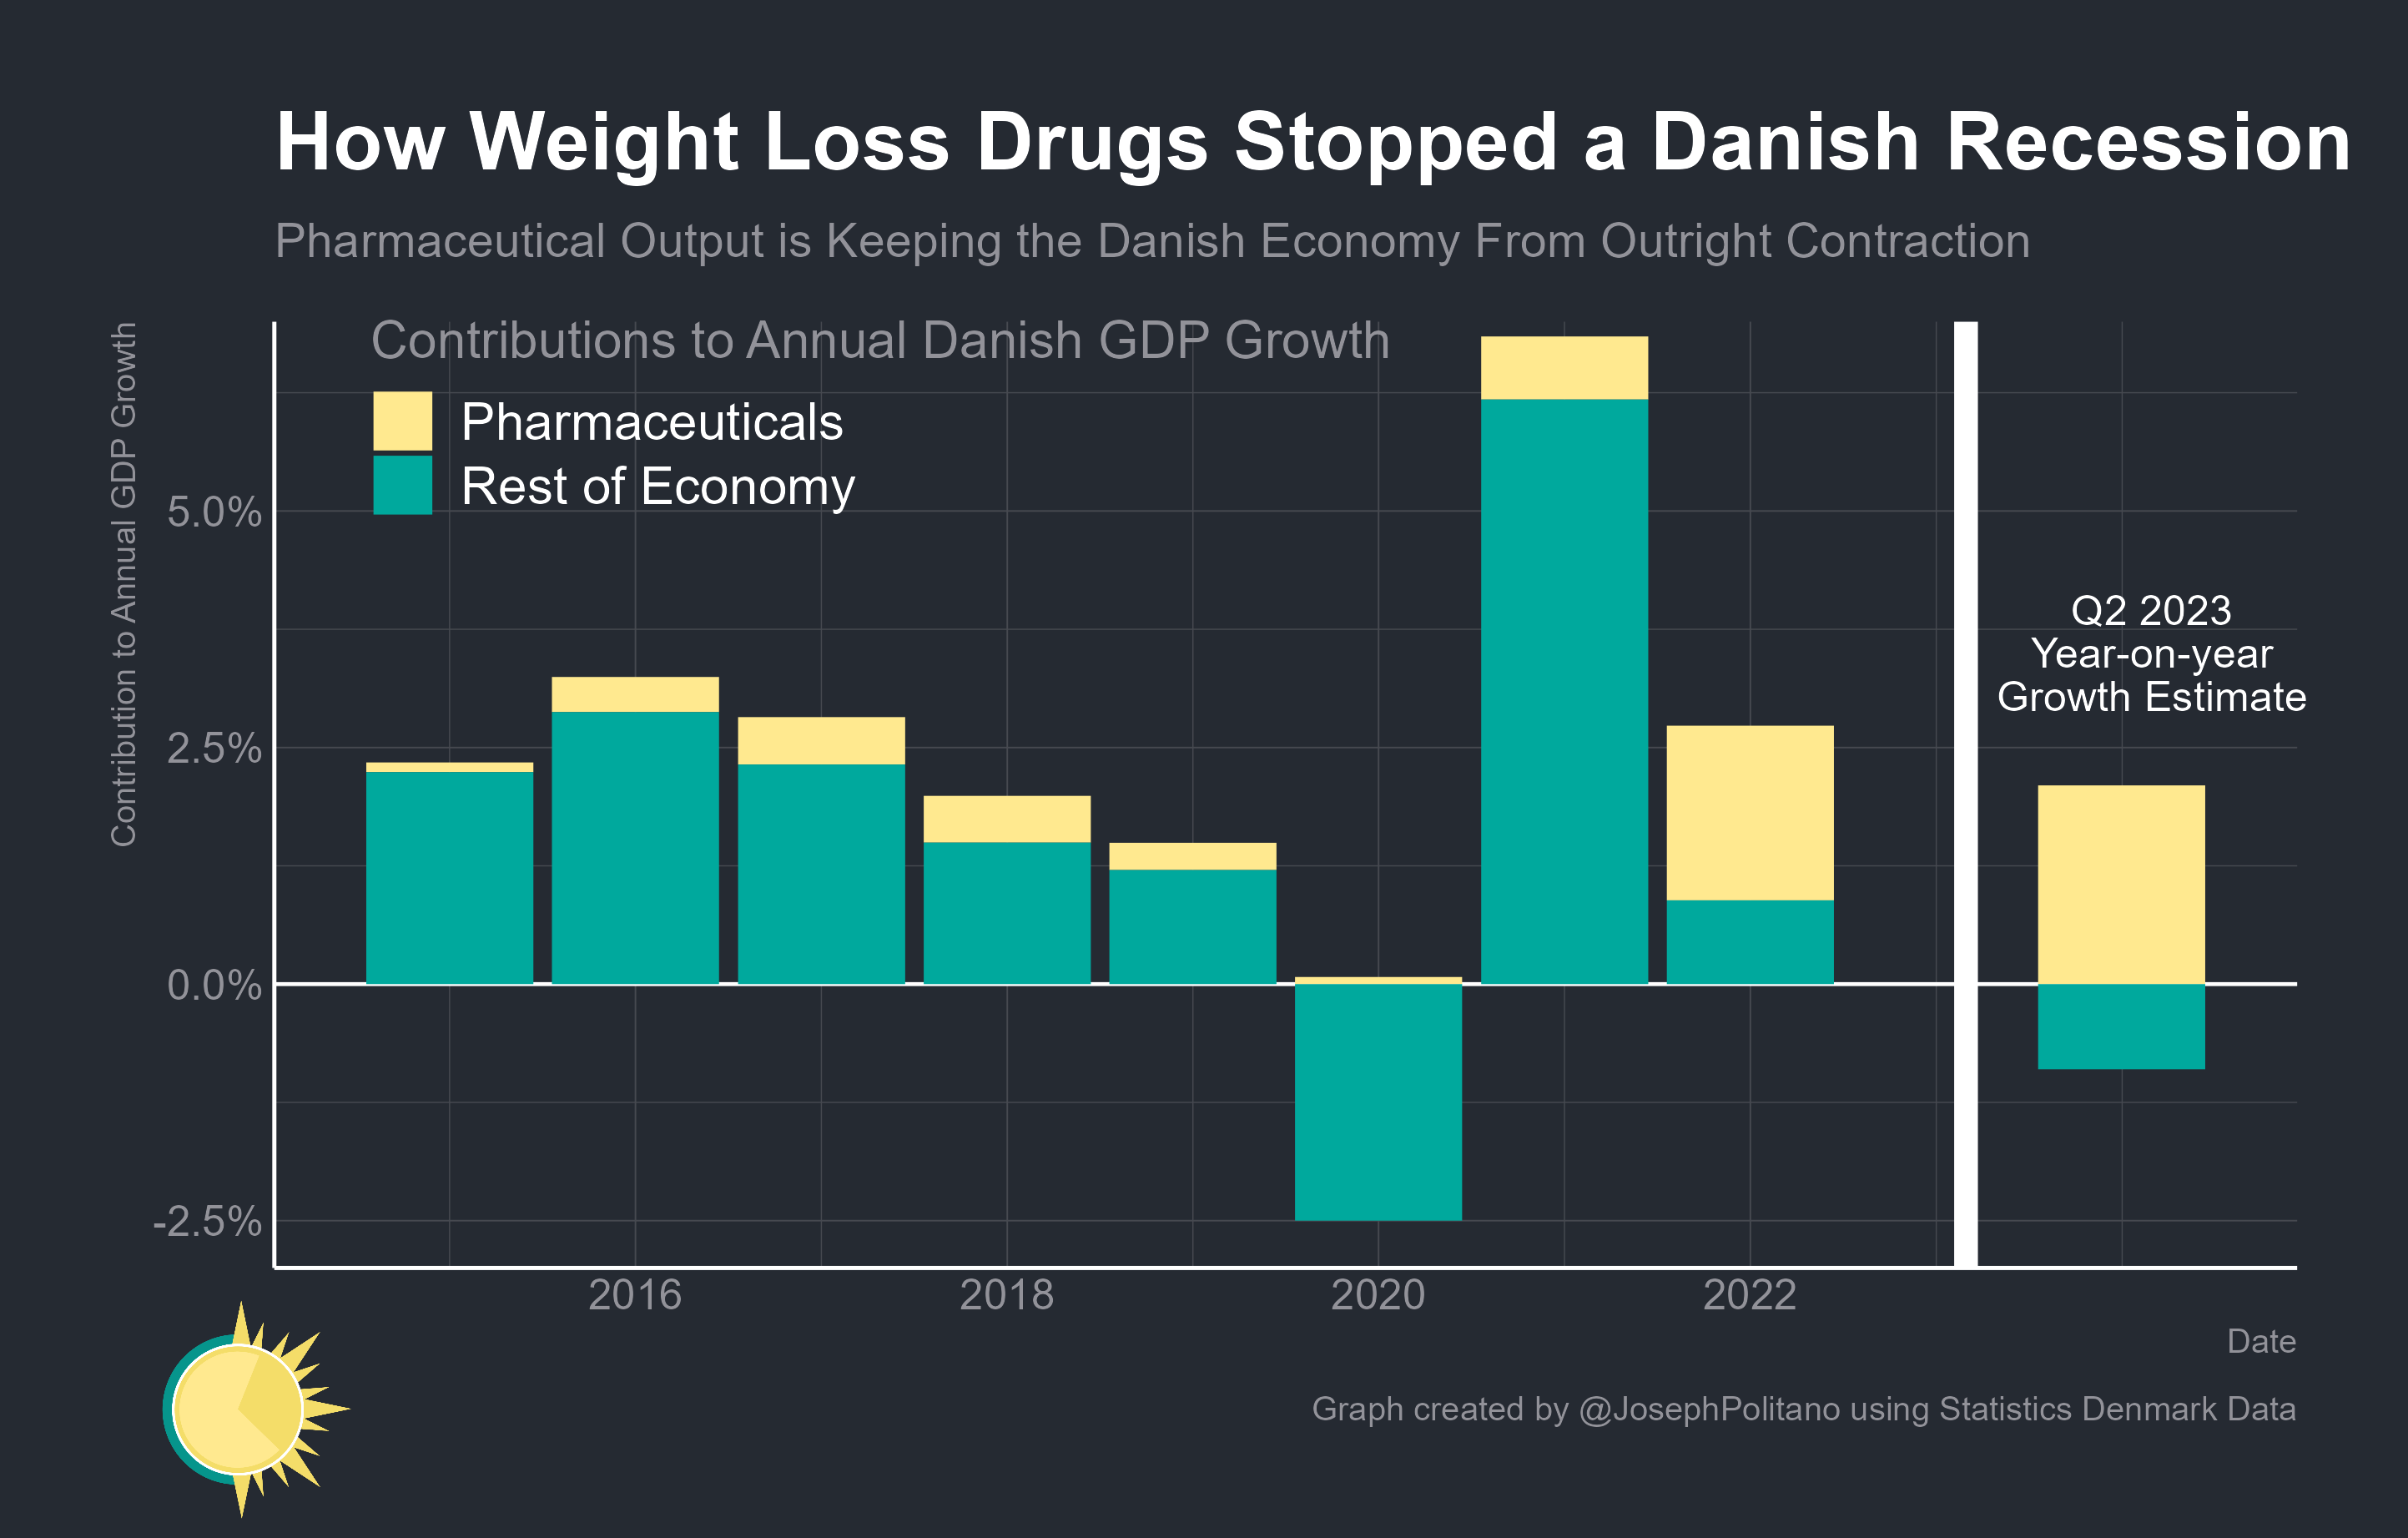 Two anti-obesity drugs delay the recession in Denmark